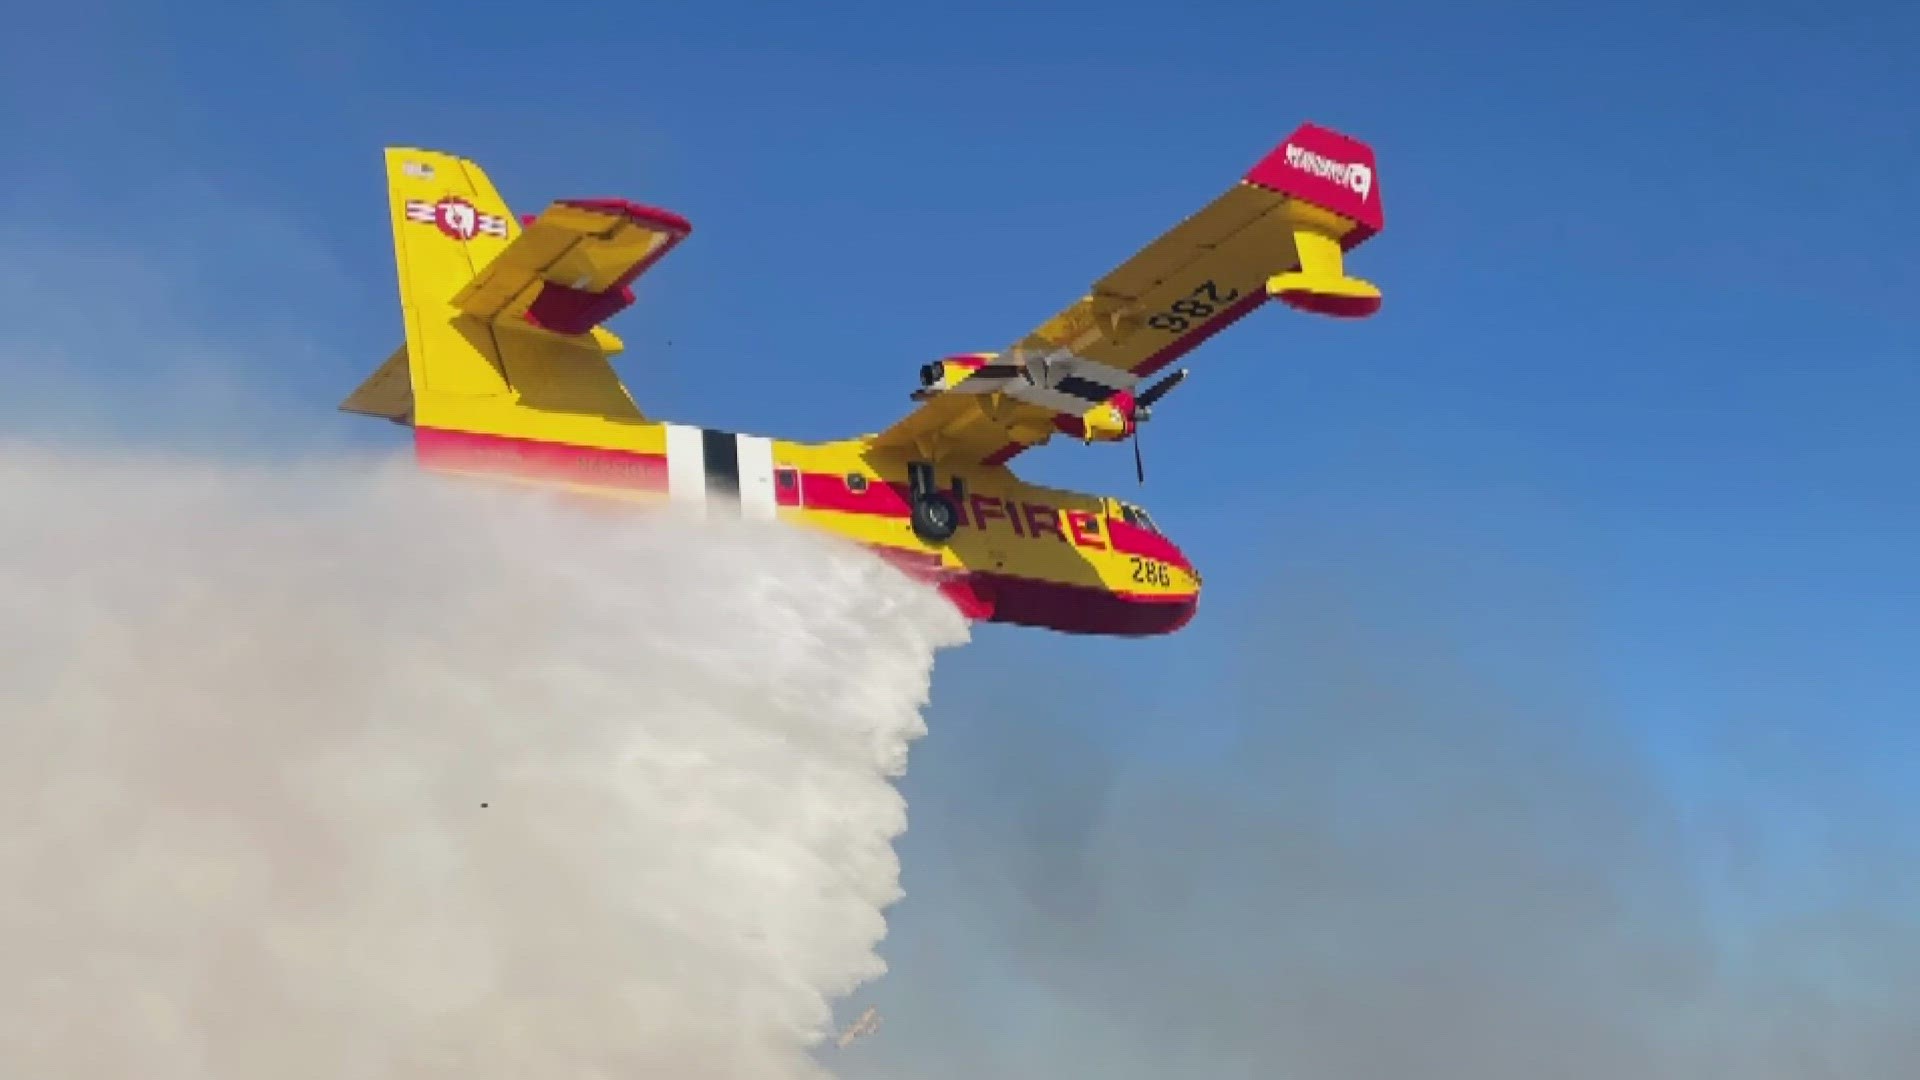 State resources like thirty aircrafts at 10 airports across the state, have been applied to help local fire departments put fires out.